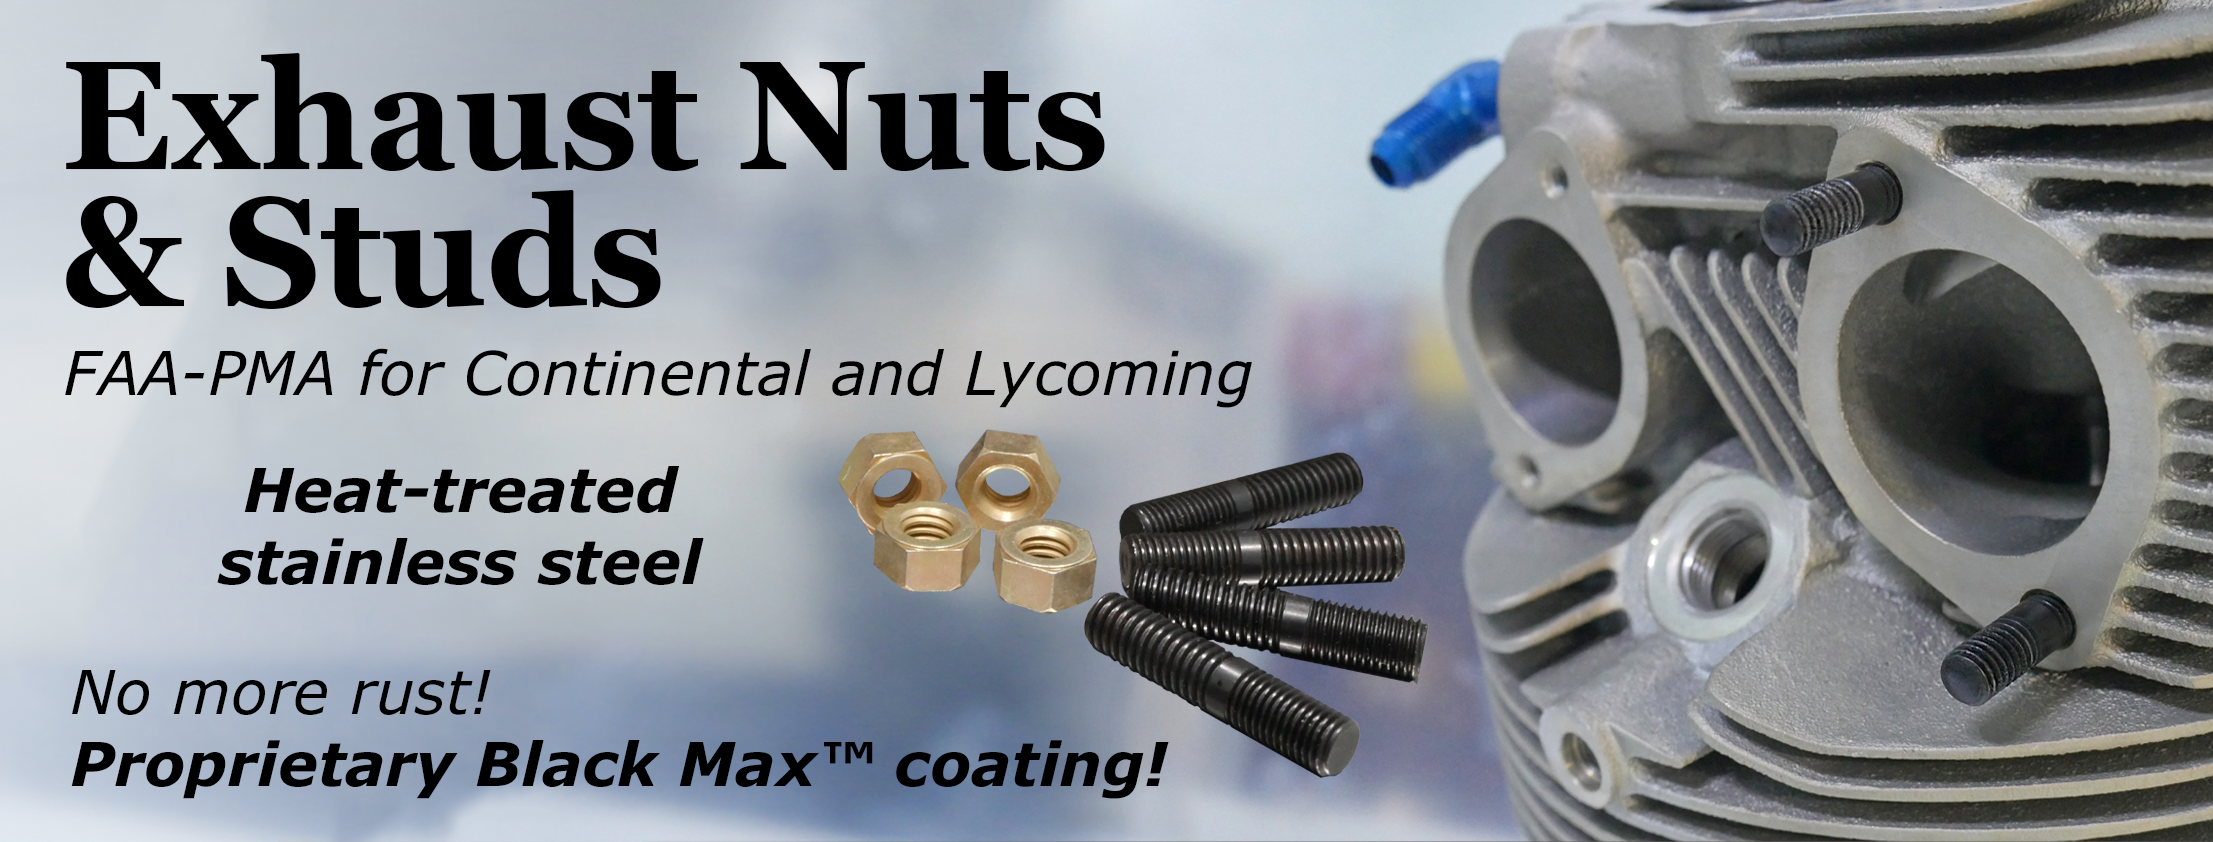 Exhaust Nuts and Studs